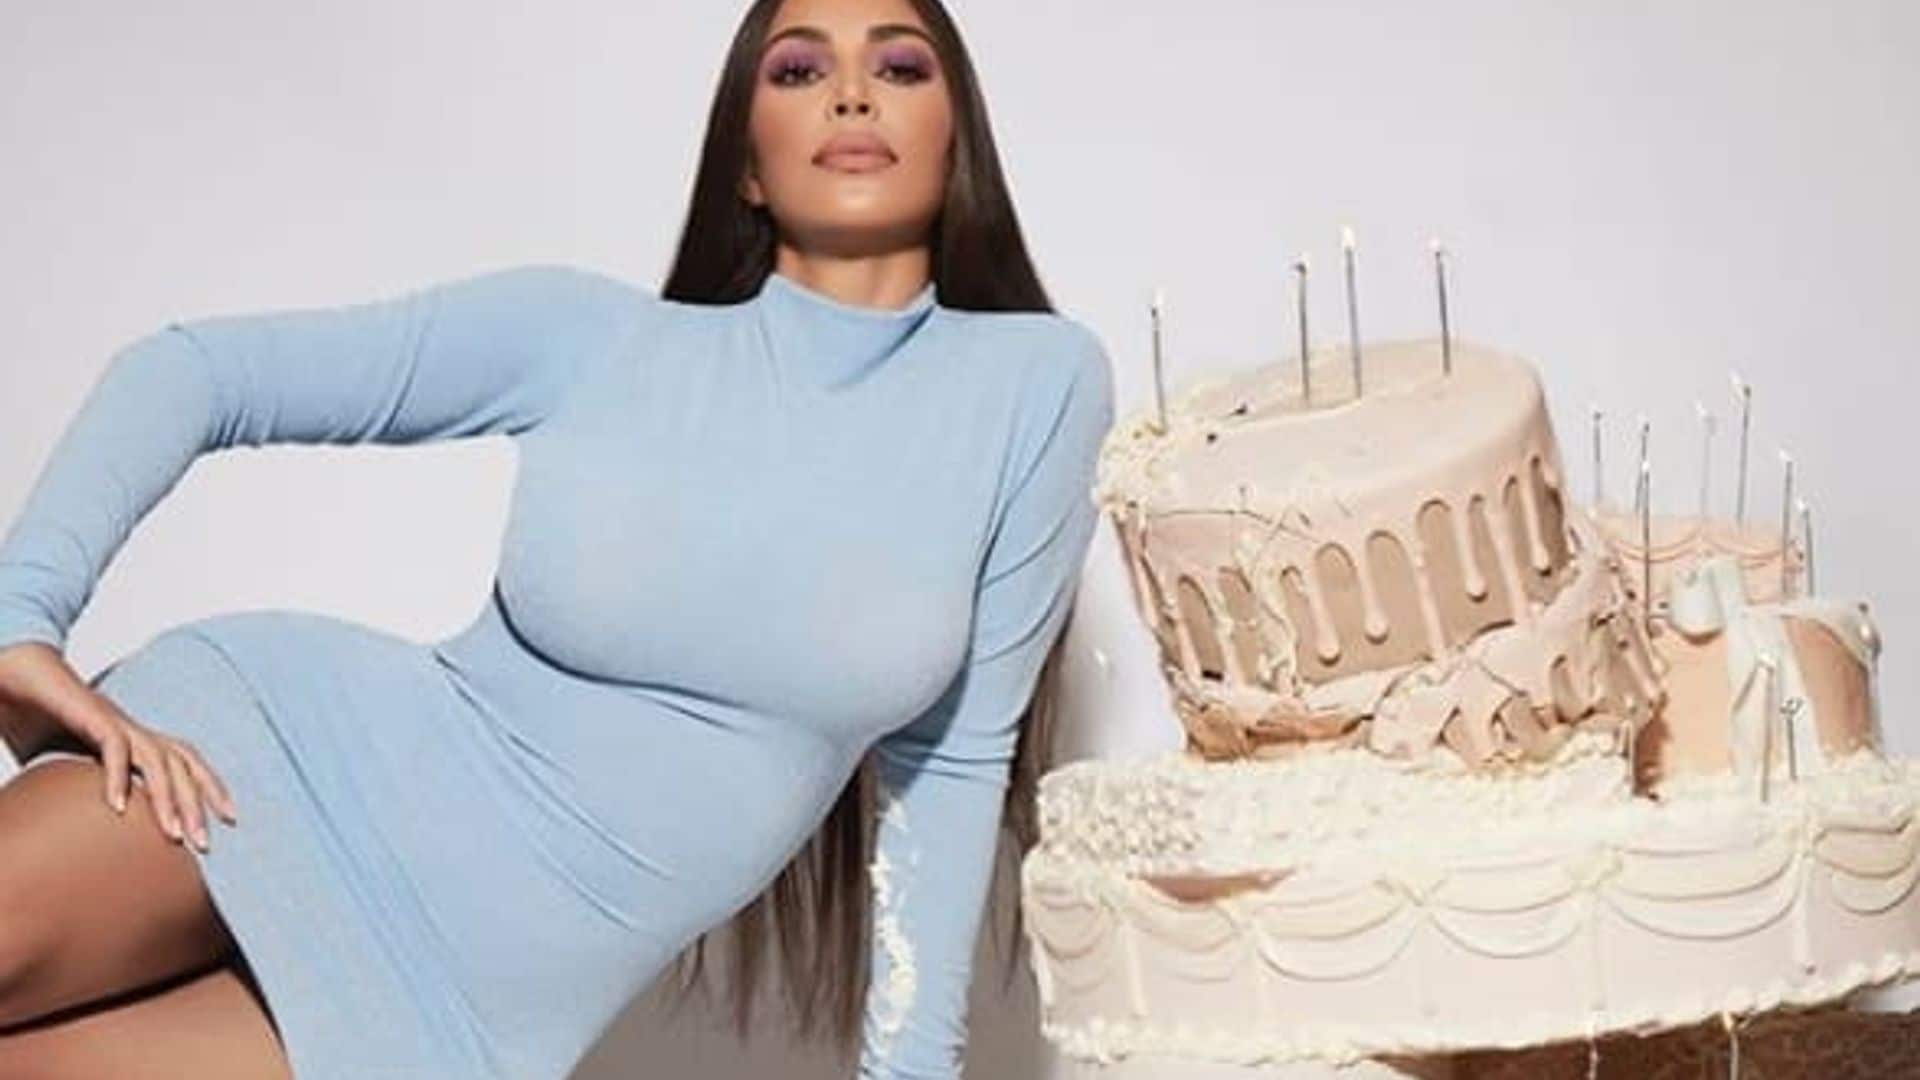 Happy Birthday Kim Kardashian! Here’s how the glam queen is celebrating her 40th birthday